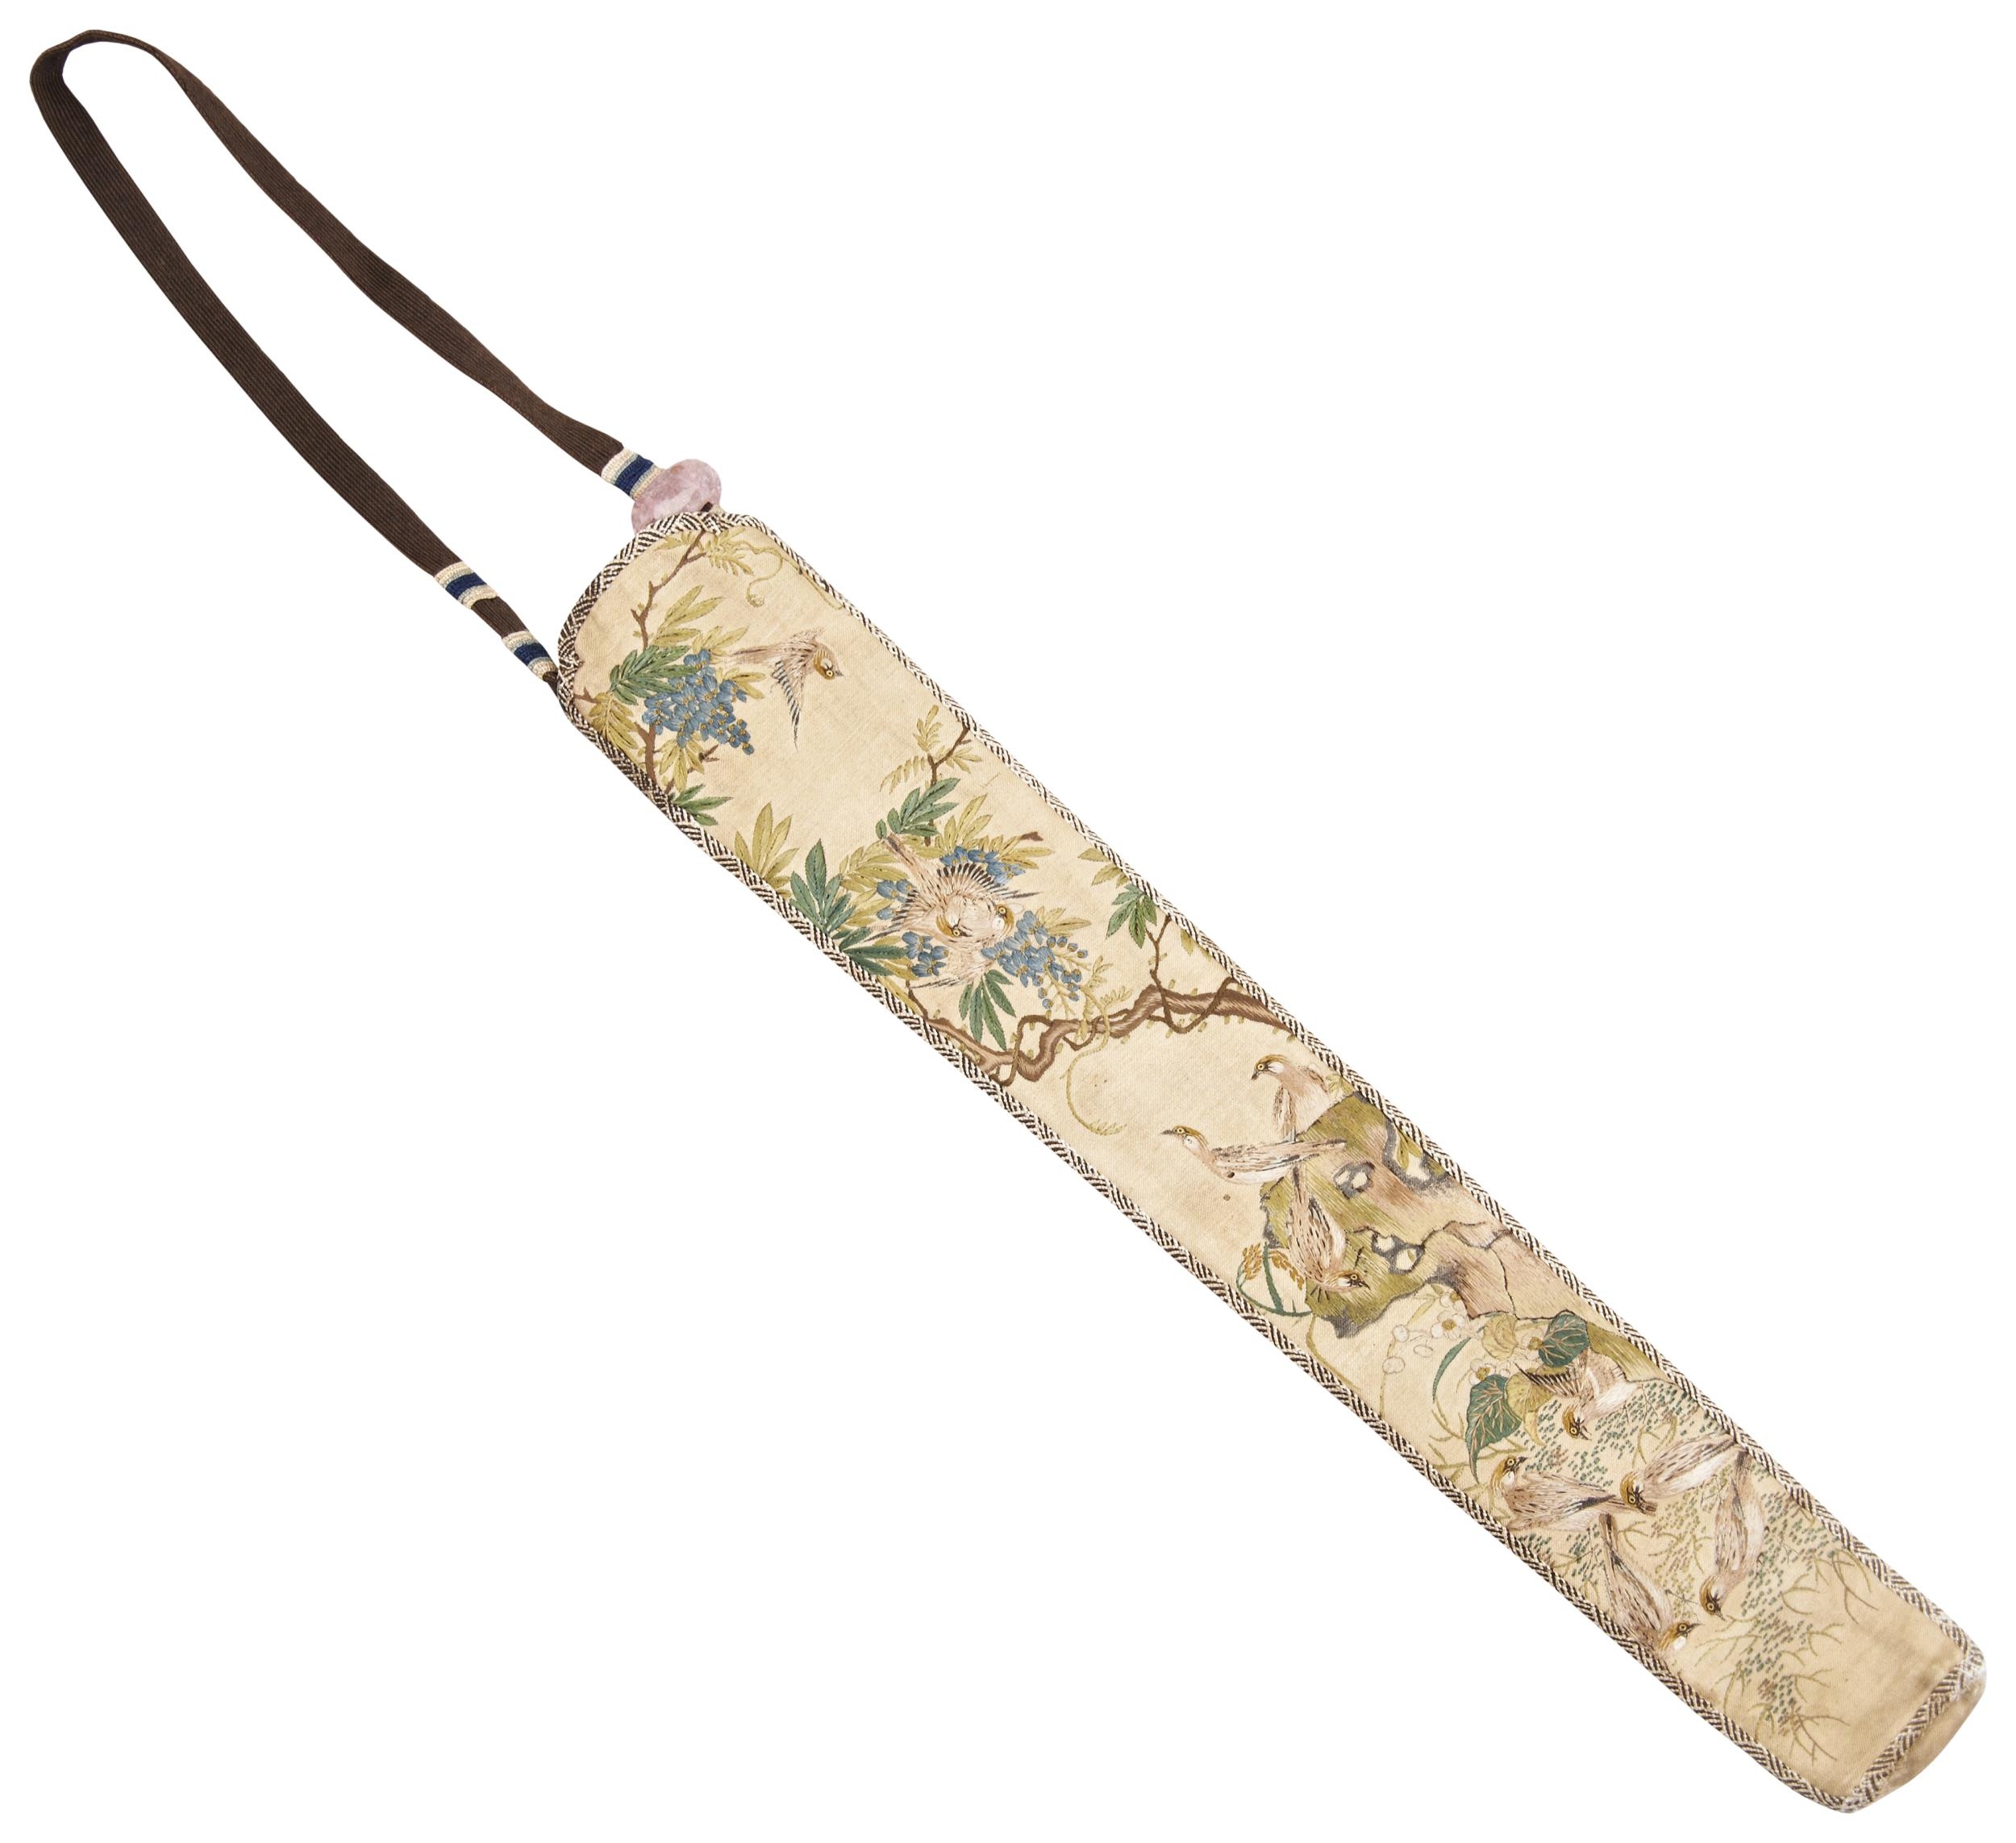 A FINE EMBROIDERED SILK FAN CASE LATE QING DYNASTY 清 刺绣扇套一件 finely worked in twisted satin stitch - Image 2 of 2